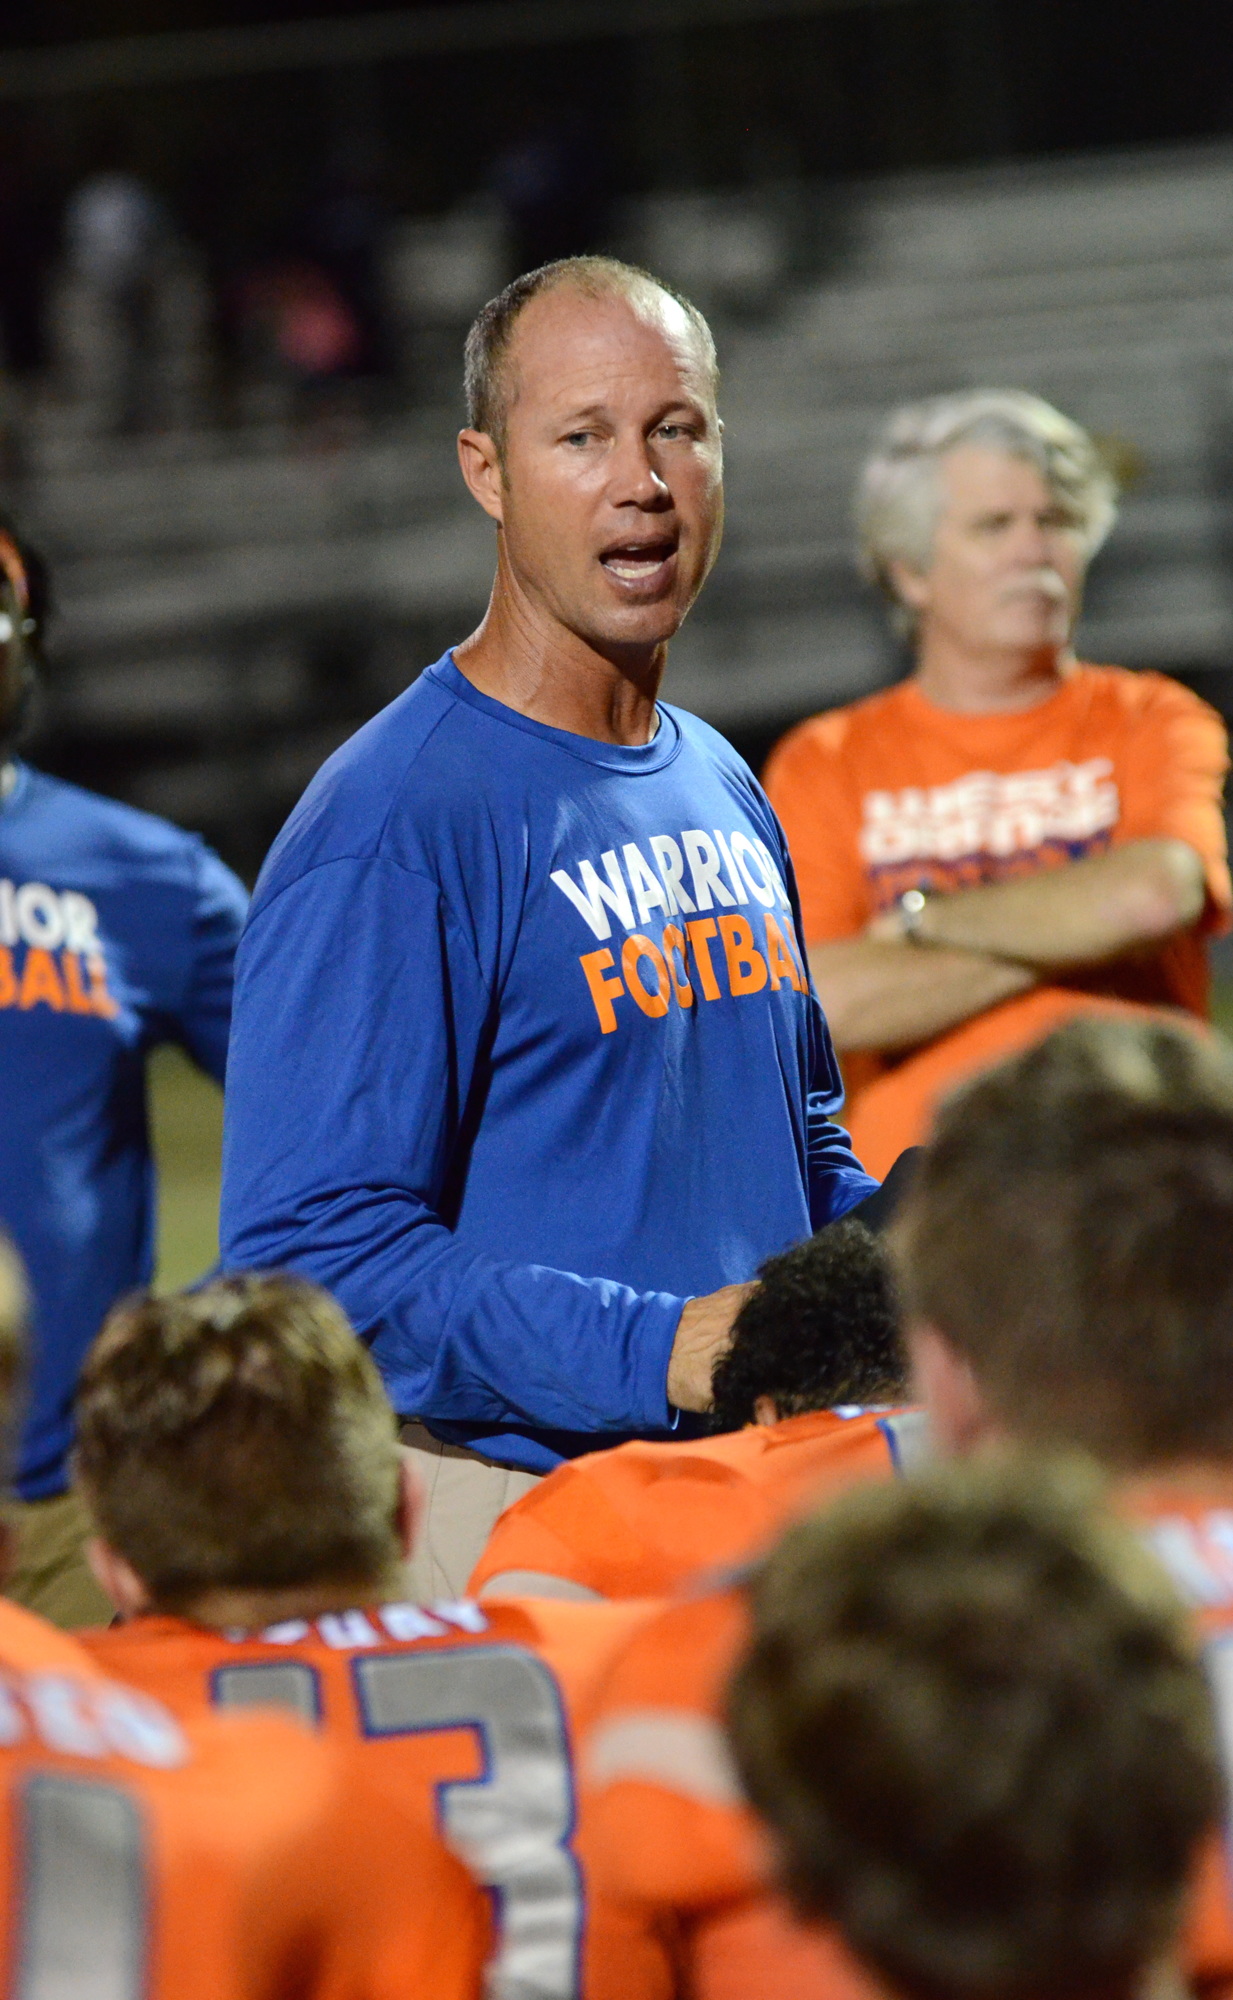 West Orange coach Bob Head will be speaking at the camp.